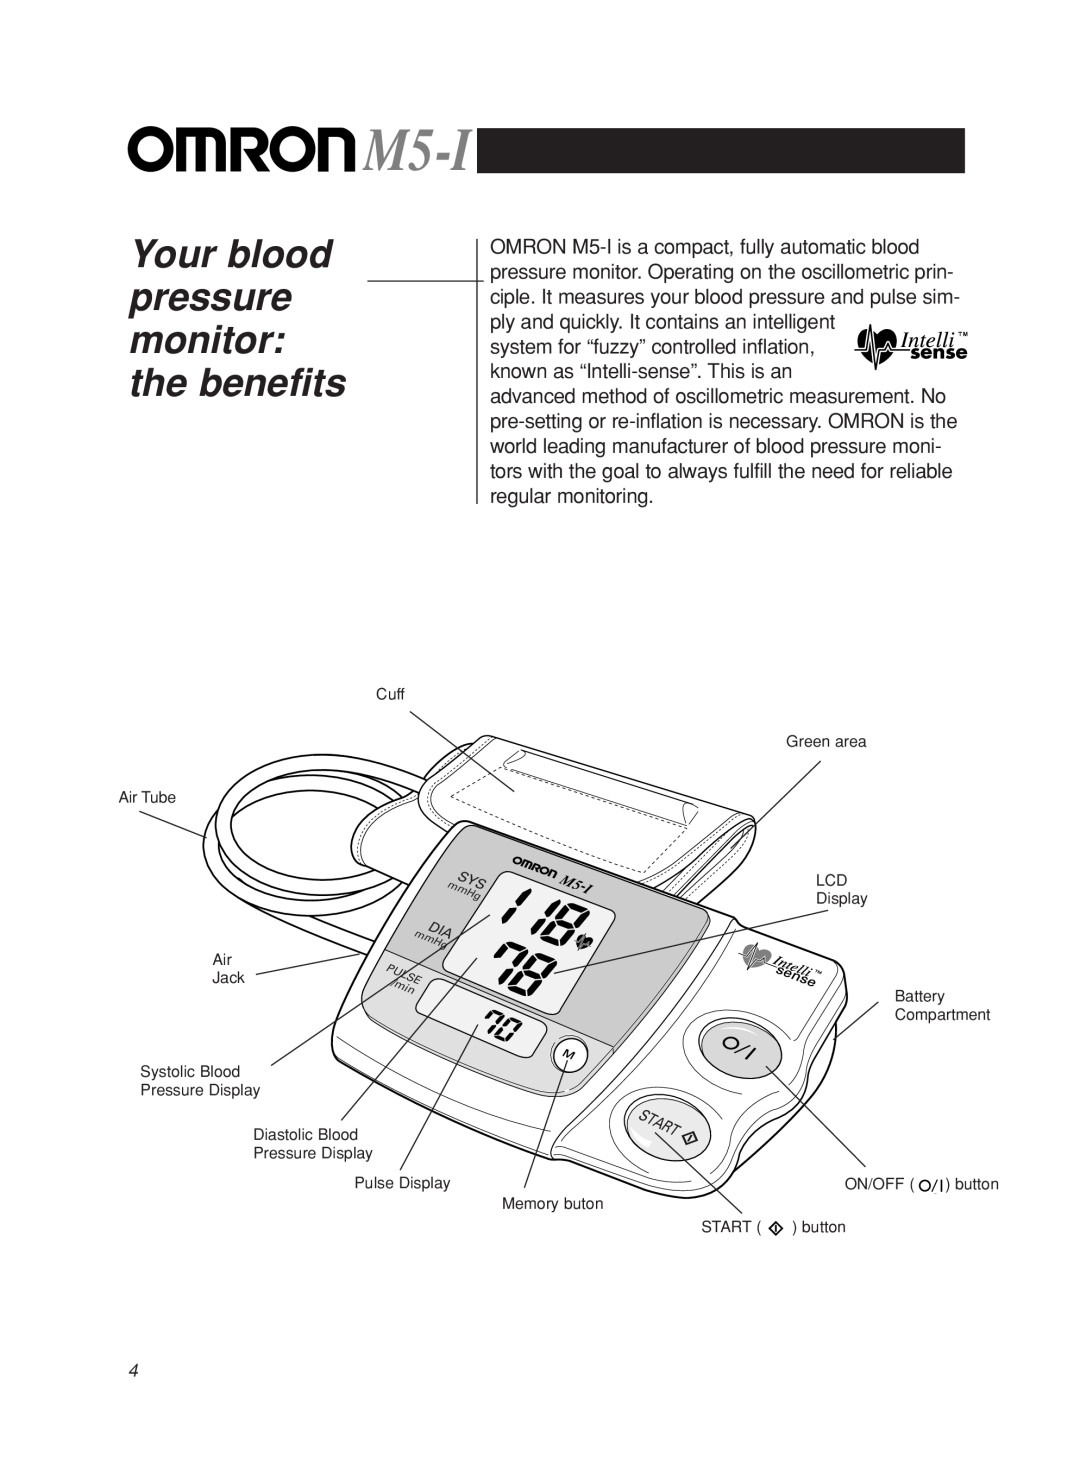 Omron M5-I instruction manual Your blood pressure monitor the benefits 